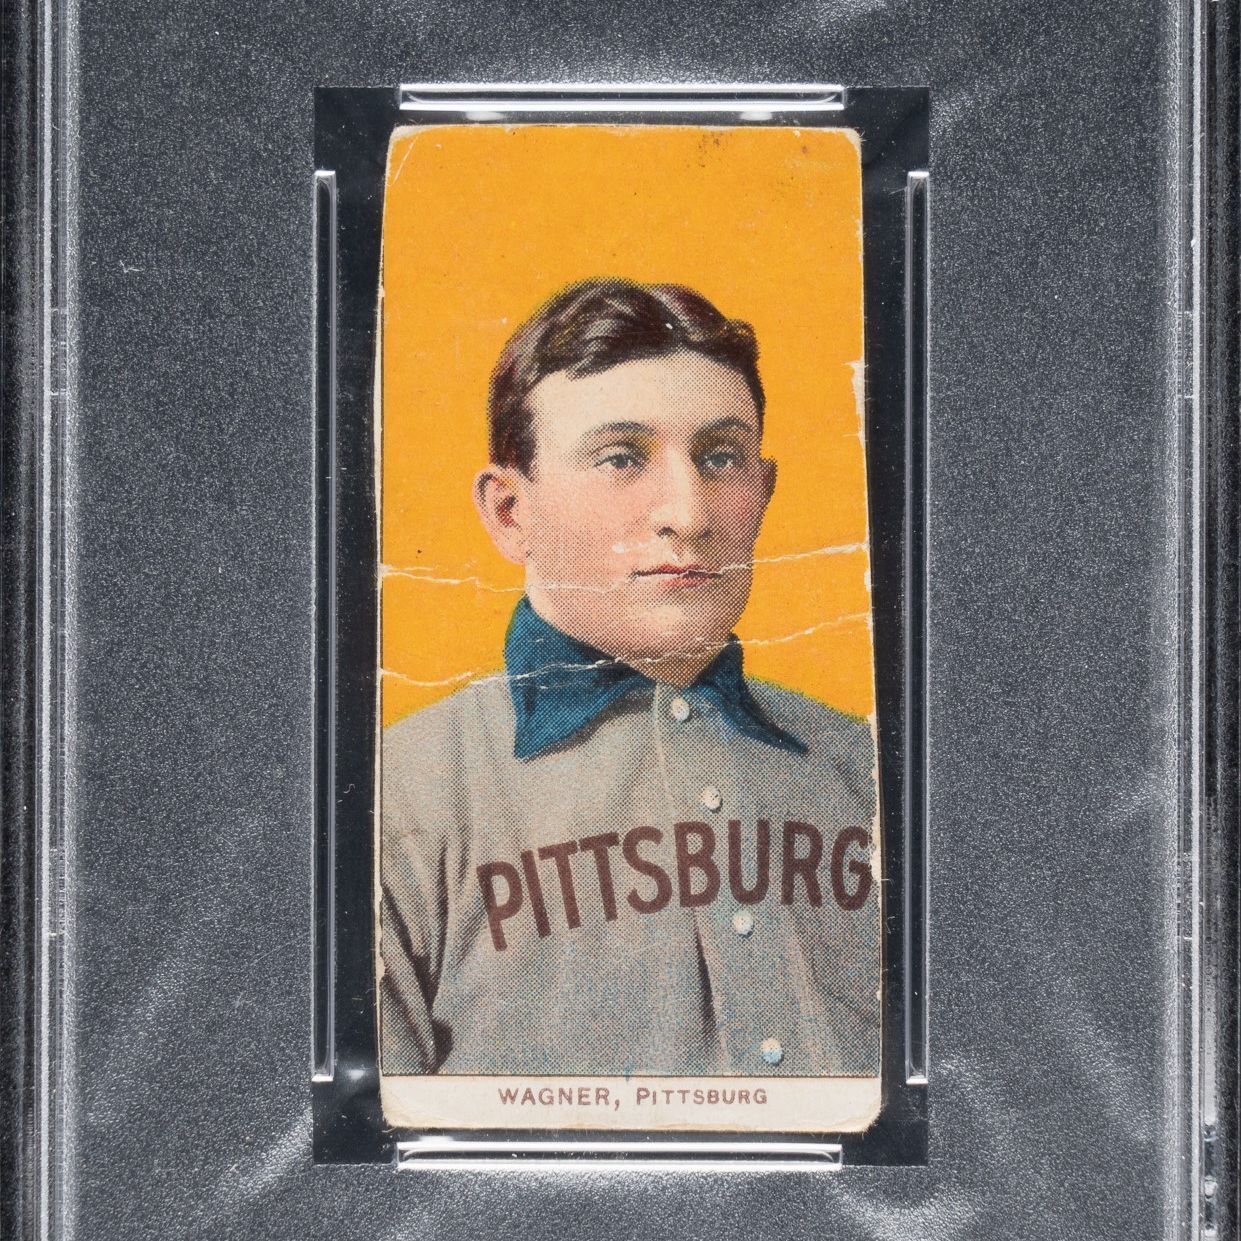 Damaged T206 Honus Wagner card sells for $1,528,066 at auction - ESPN